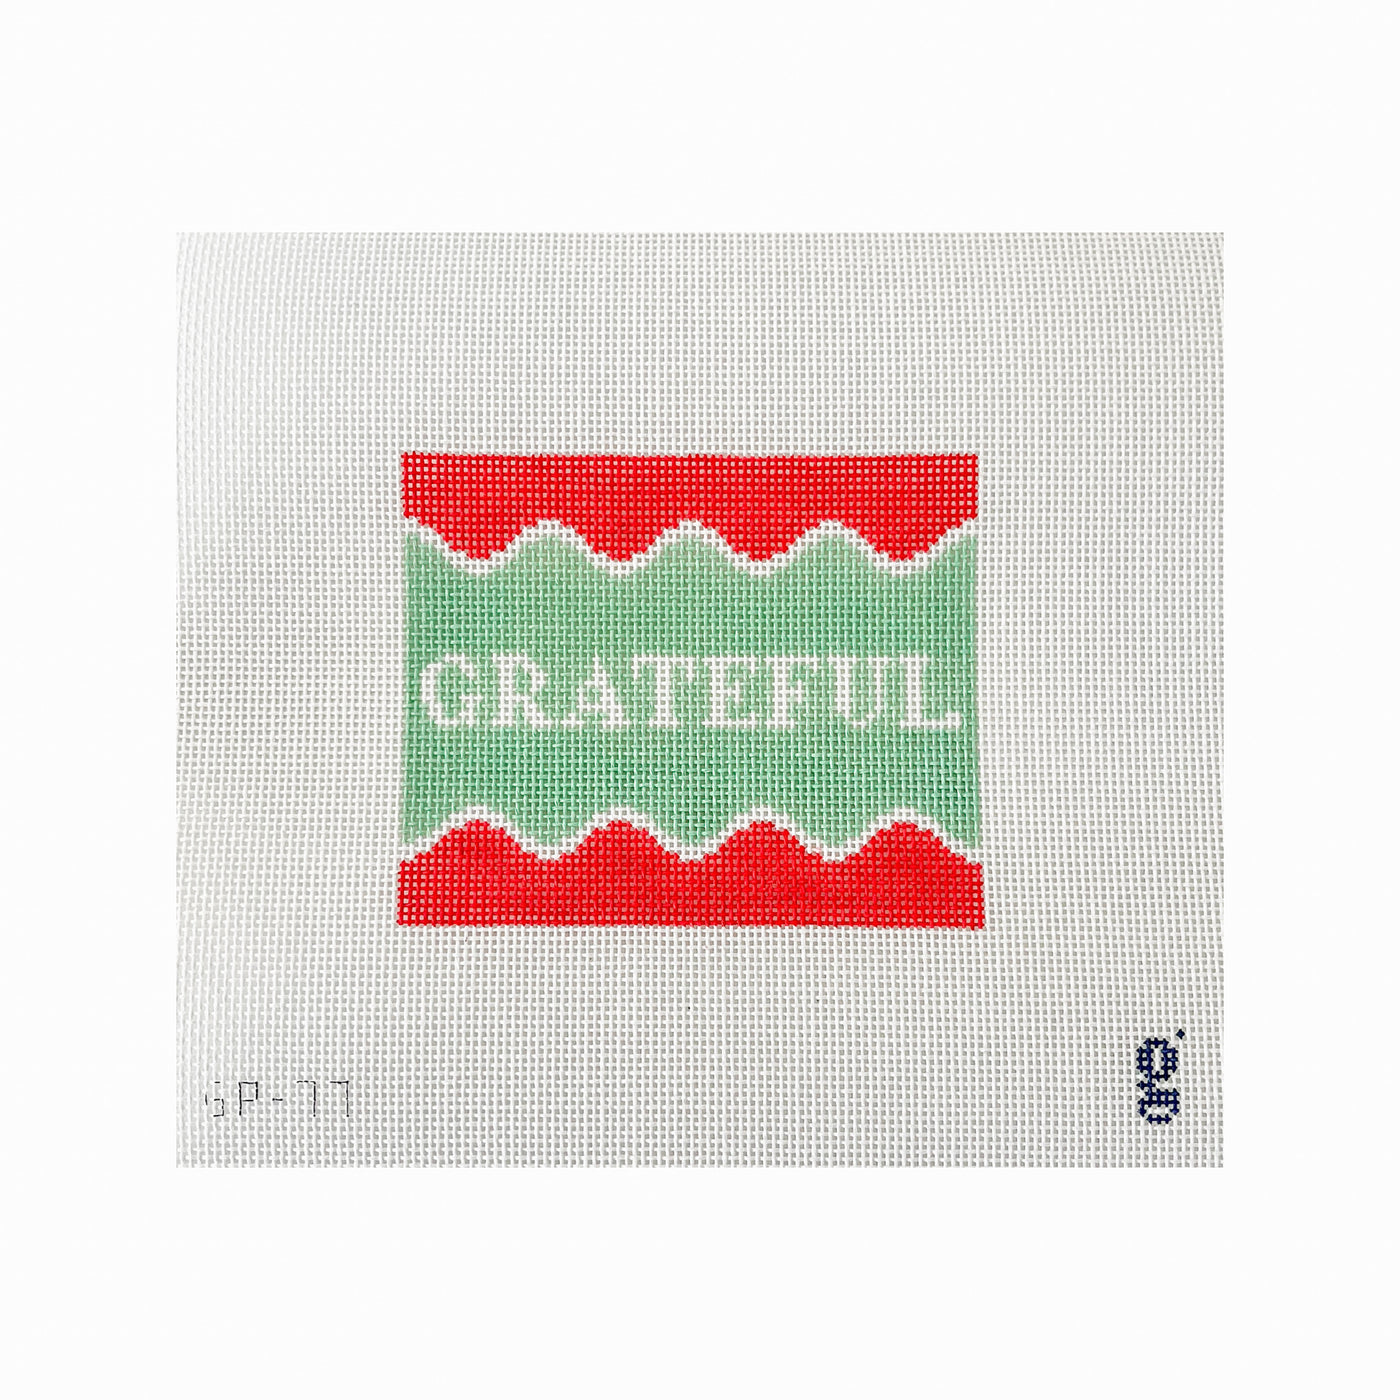 White needlepoint canvas with red, white and mint green design with the word GRATEFUL at center in white